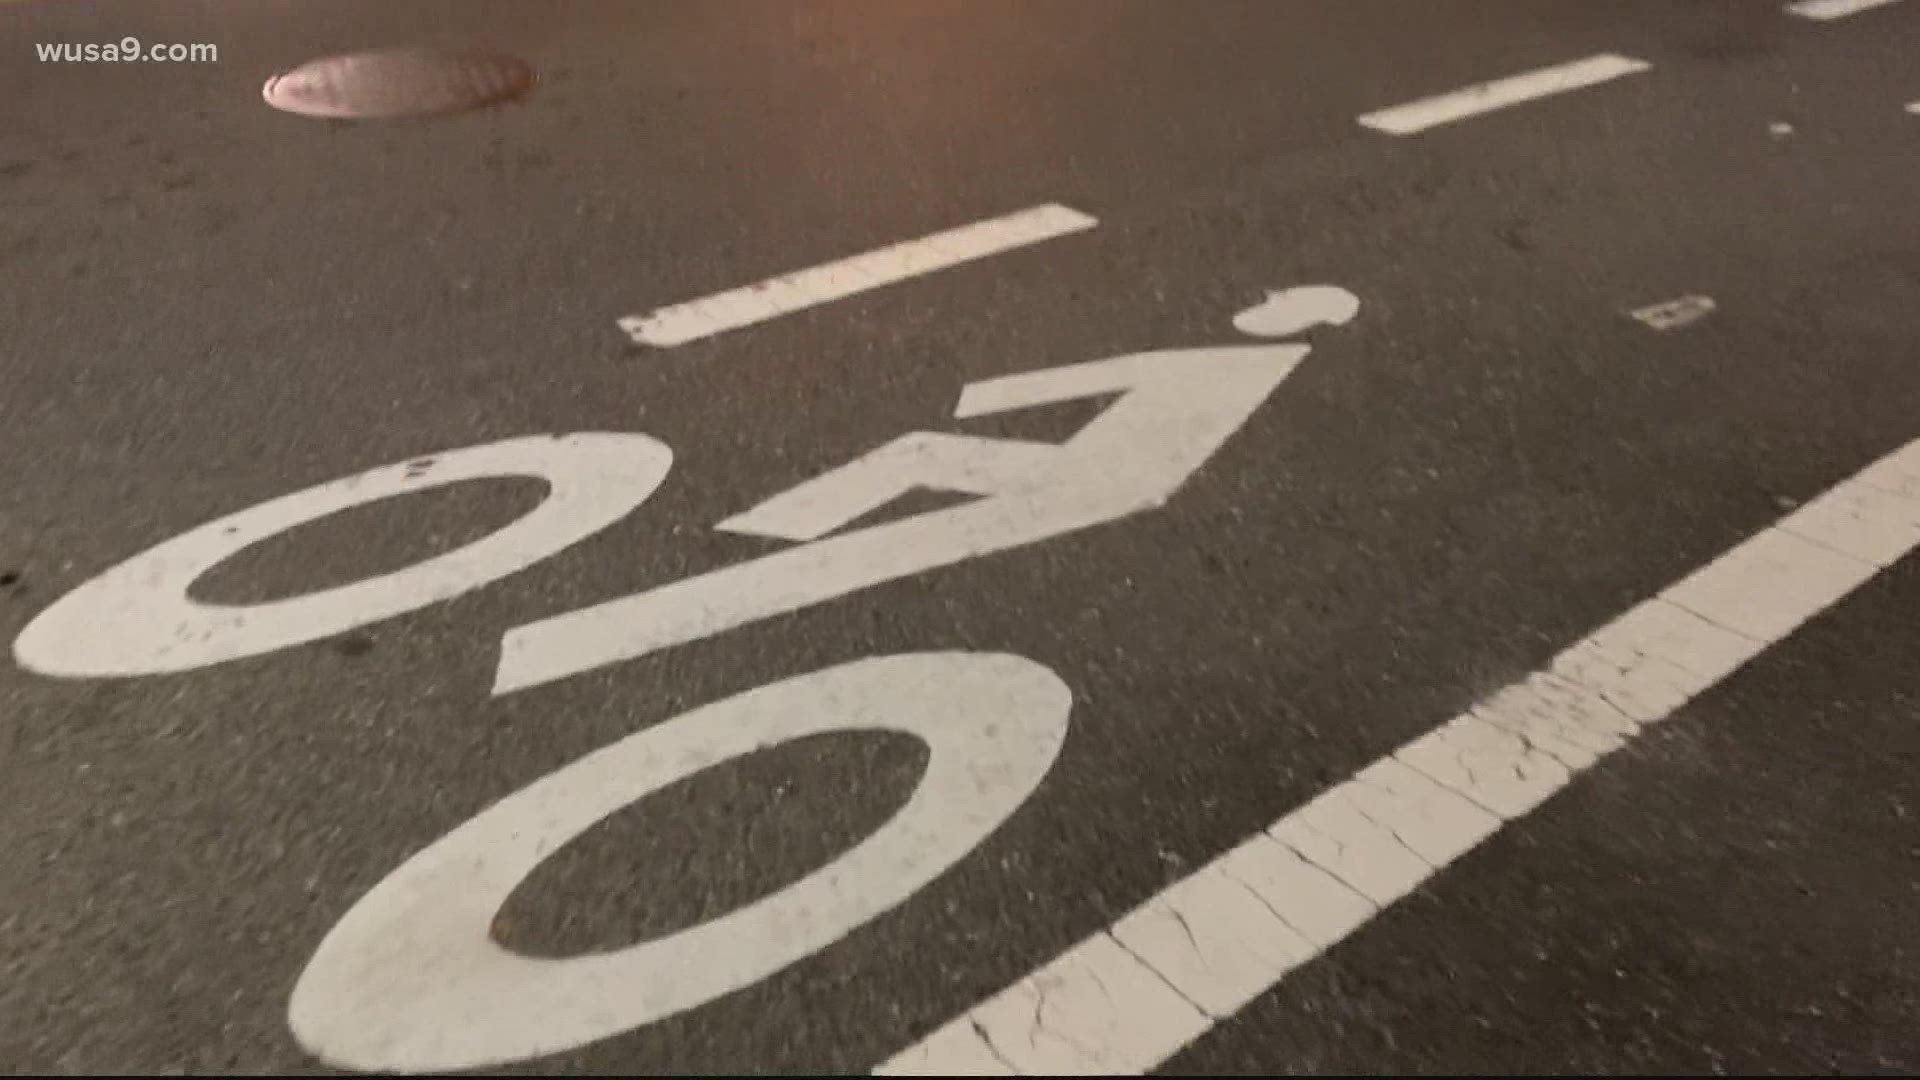 Another $5M is proposed to support the Vision Zero Initiative.